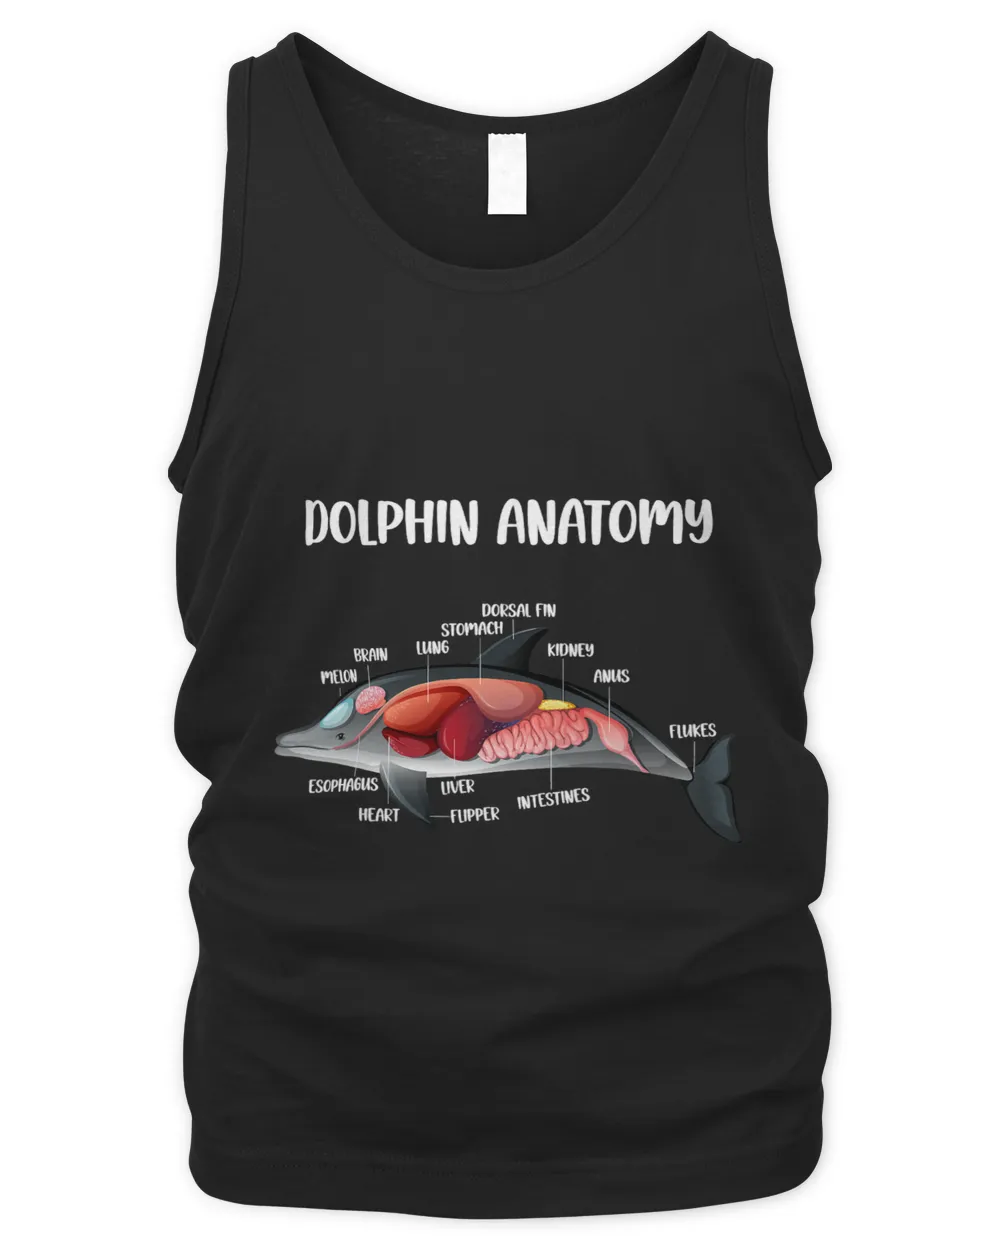 Anatomy Of A Dolphin Anatomical Doctor Veterinarian Medical